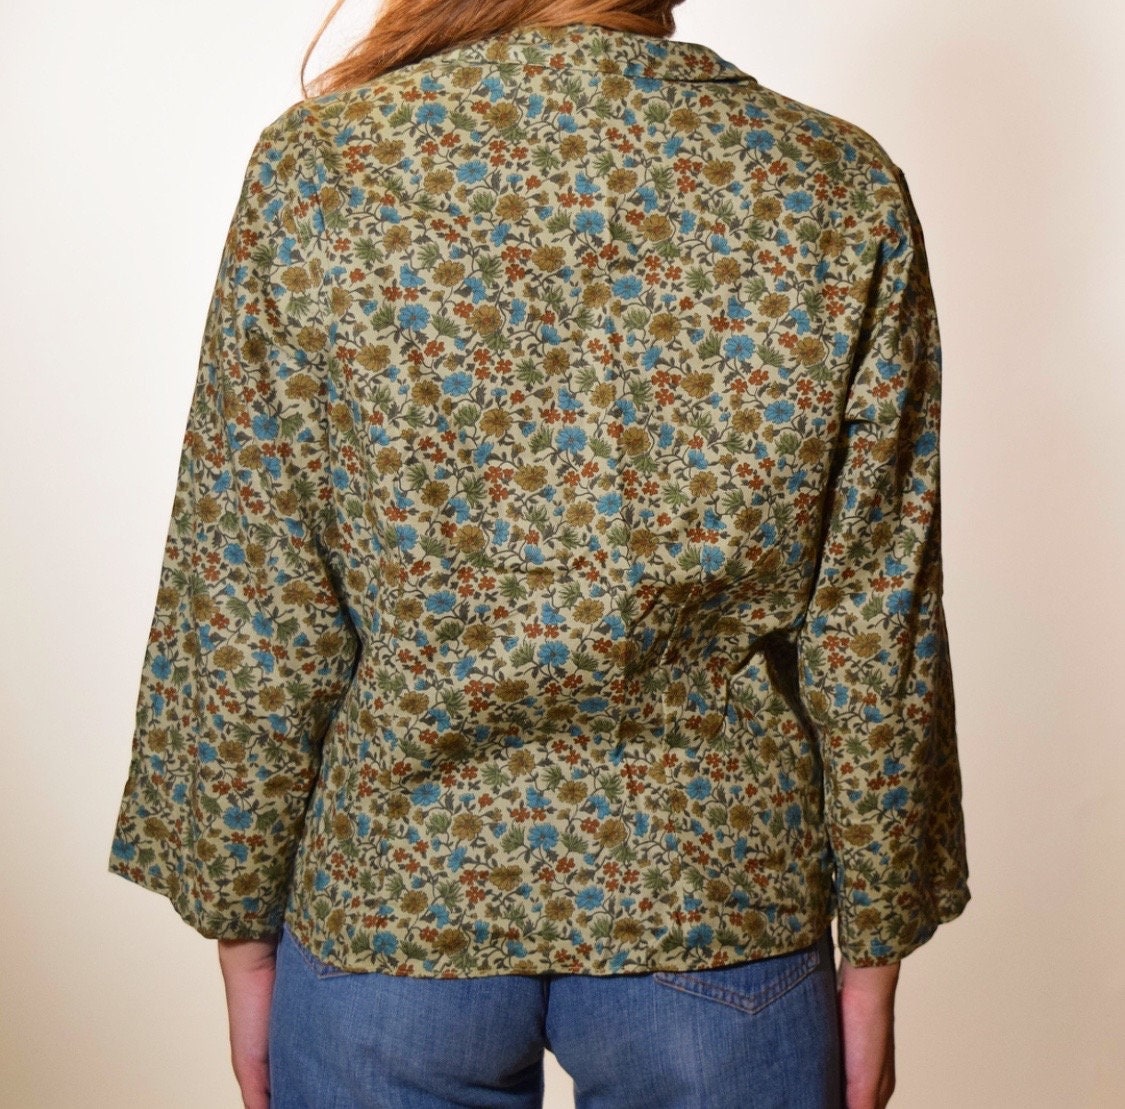 1950s-1960s authentic vintage button down earth tone green floral ...